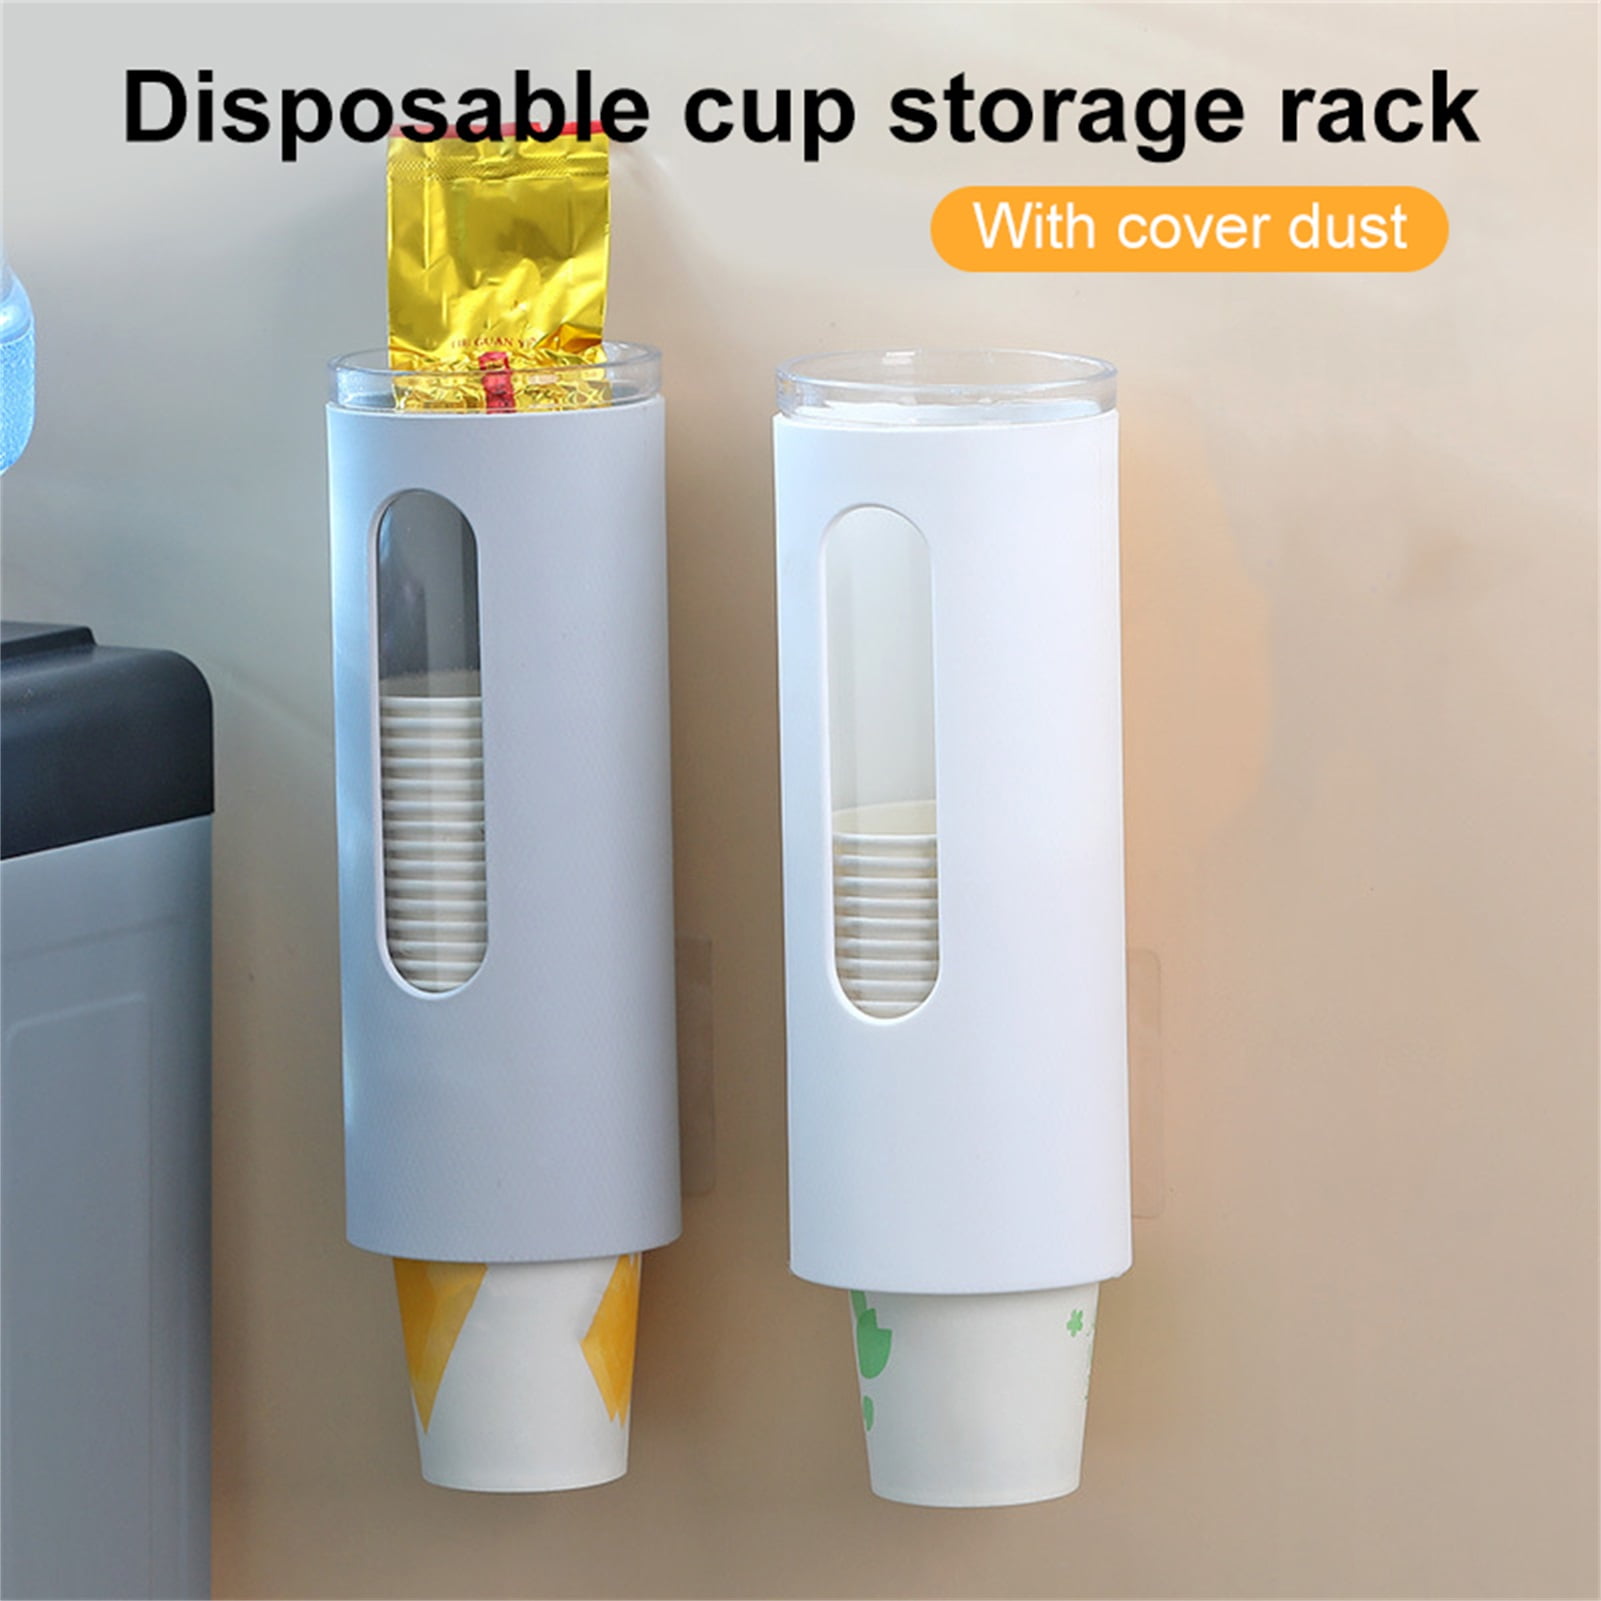 L for 8-14 oz Cups Wall Mounted Cup Dispenser,Paper or Plastic Cup Organizer,Including Magnetic Plate Cup Rack Disposable Cup Dispenser 